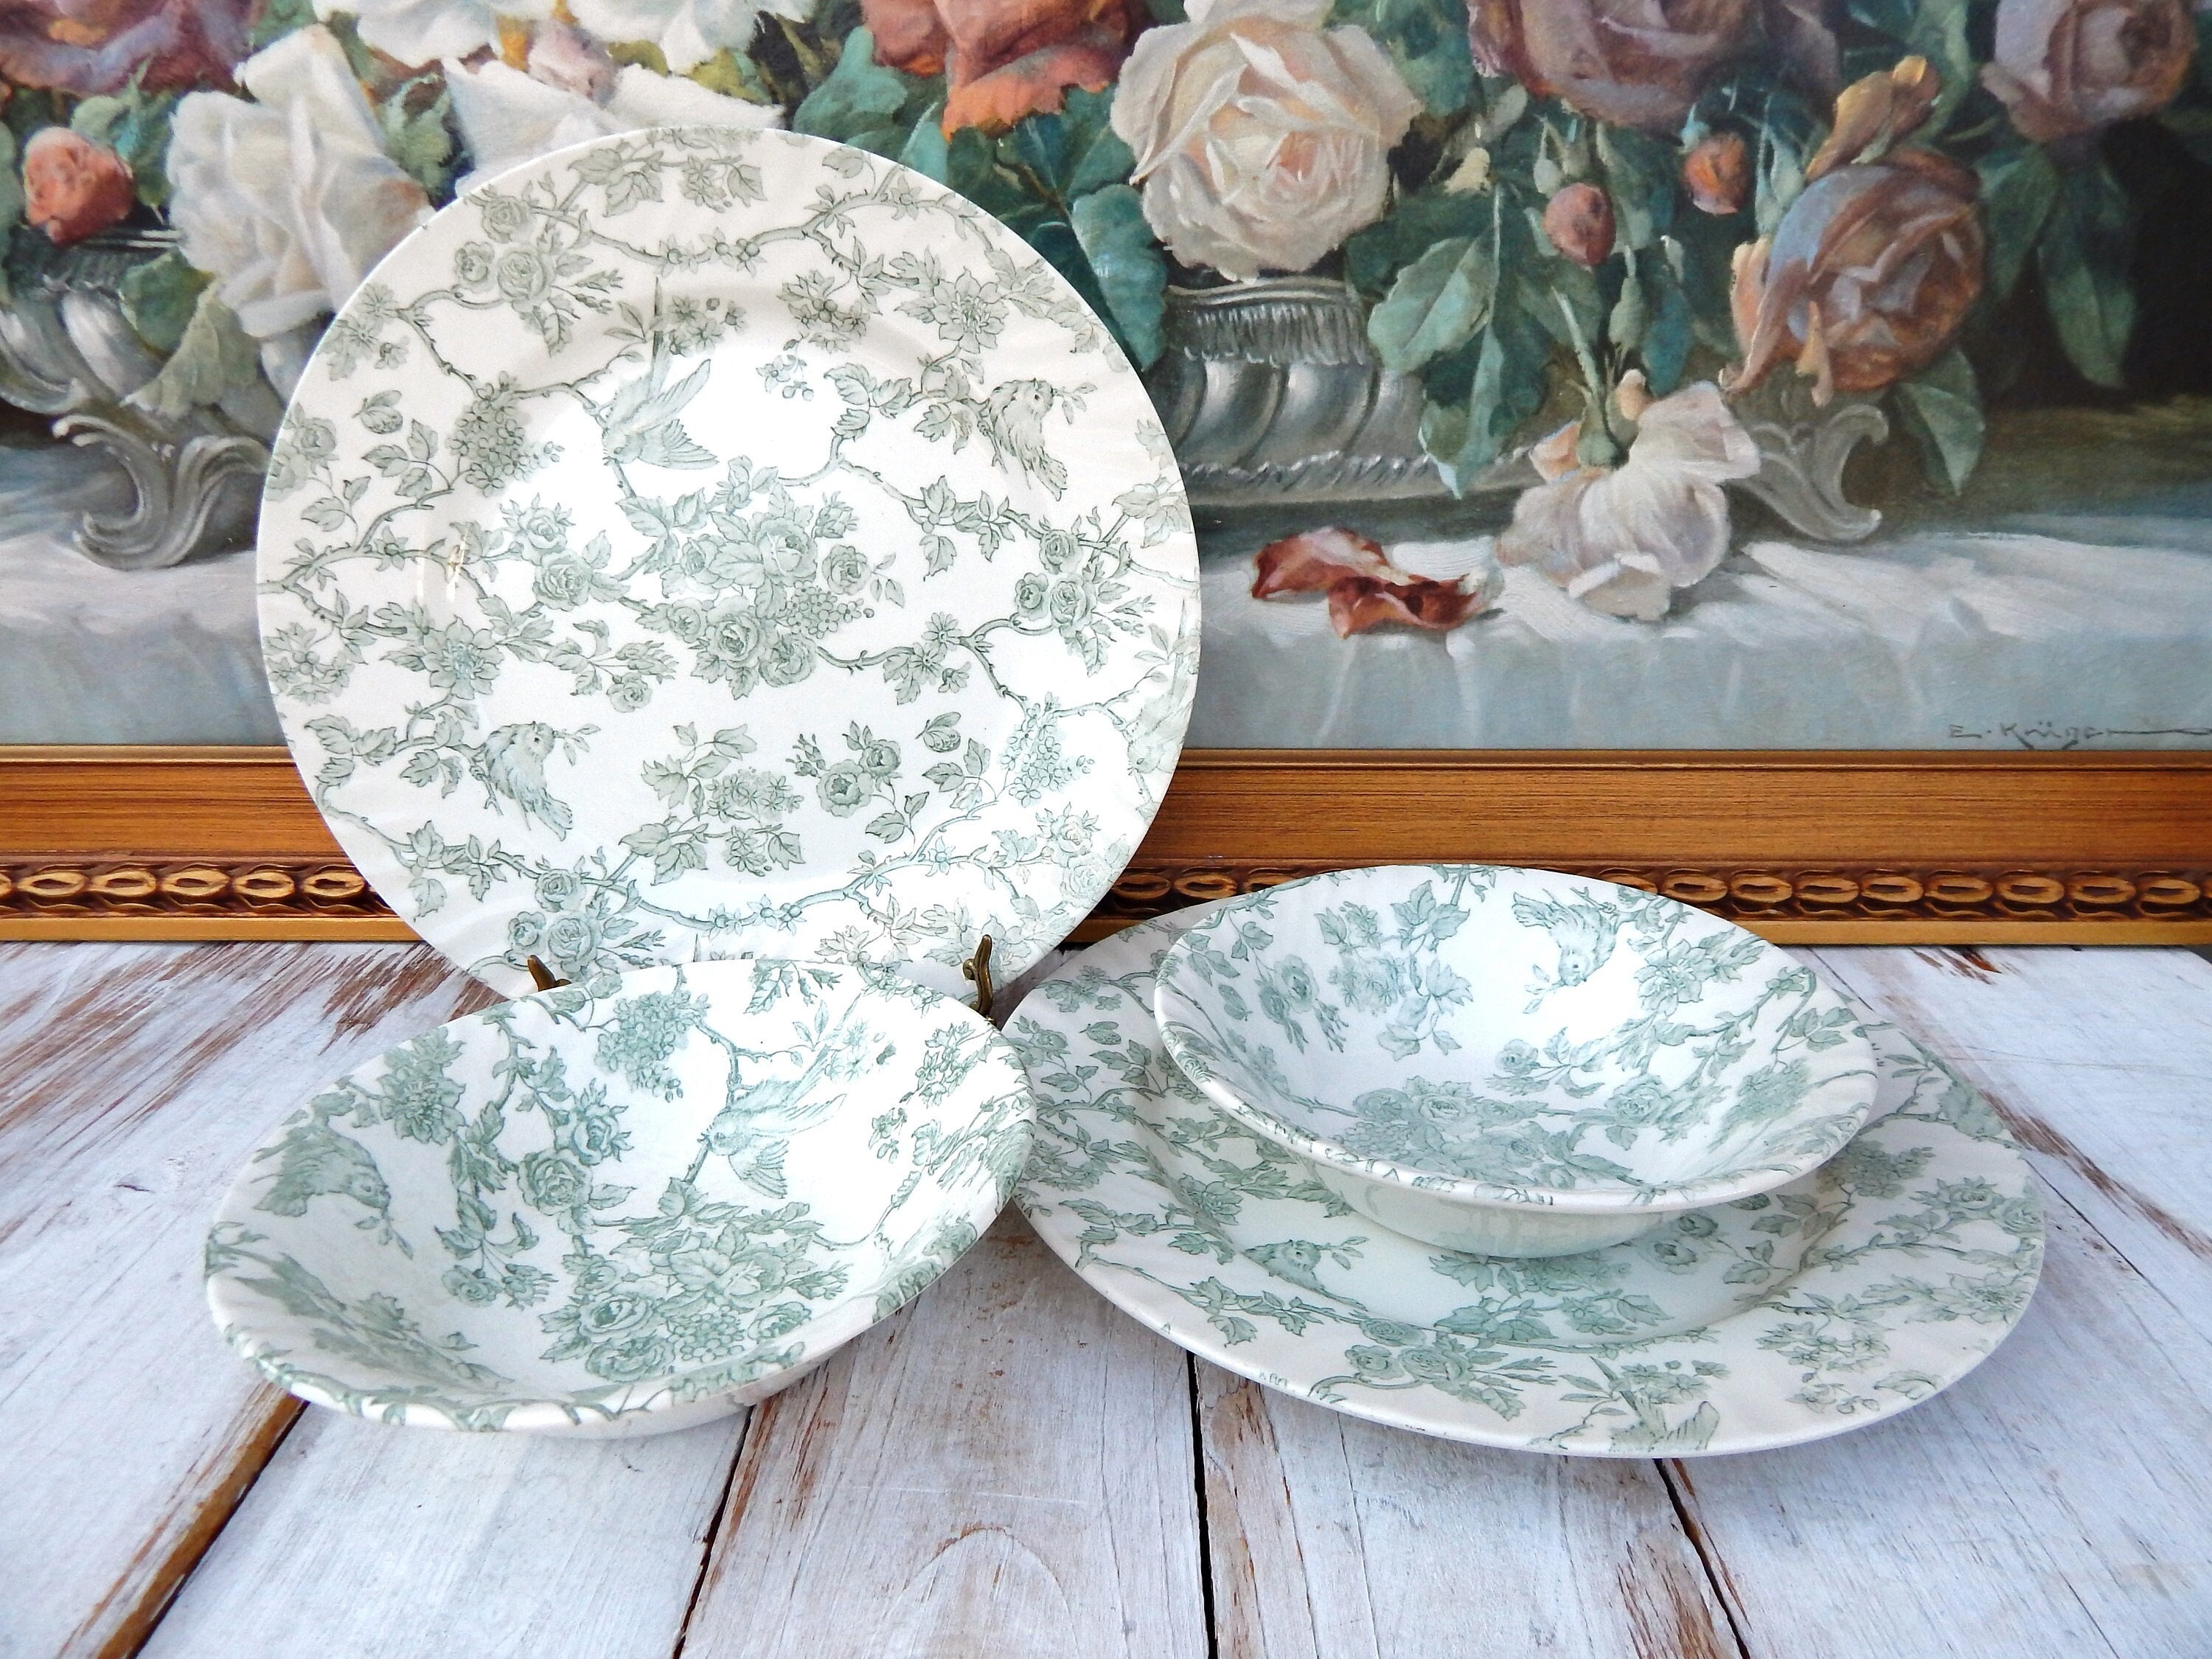 Green Toile Plates & Bowls Set BARRATS England SONGBIRDS GREEN Rare  Discontinued Pattern, Floral Chintz Dinner Plates Cereal Bowls, Vintage -  Etsy